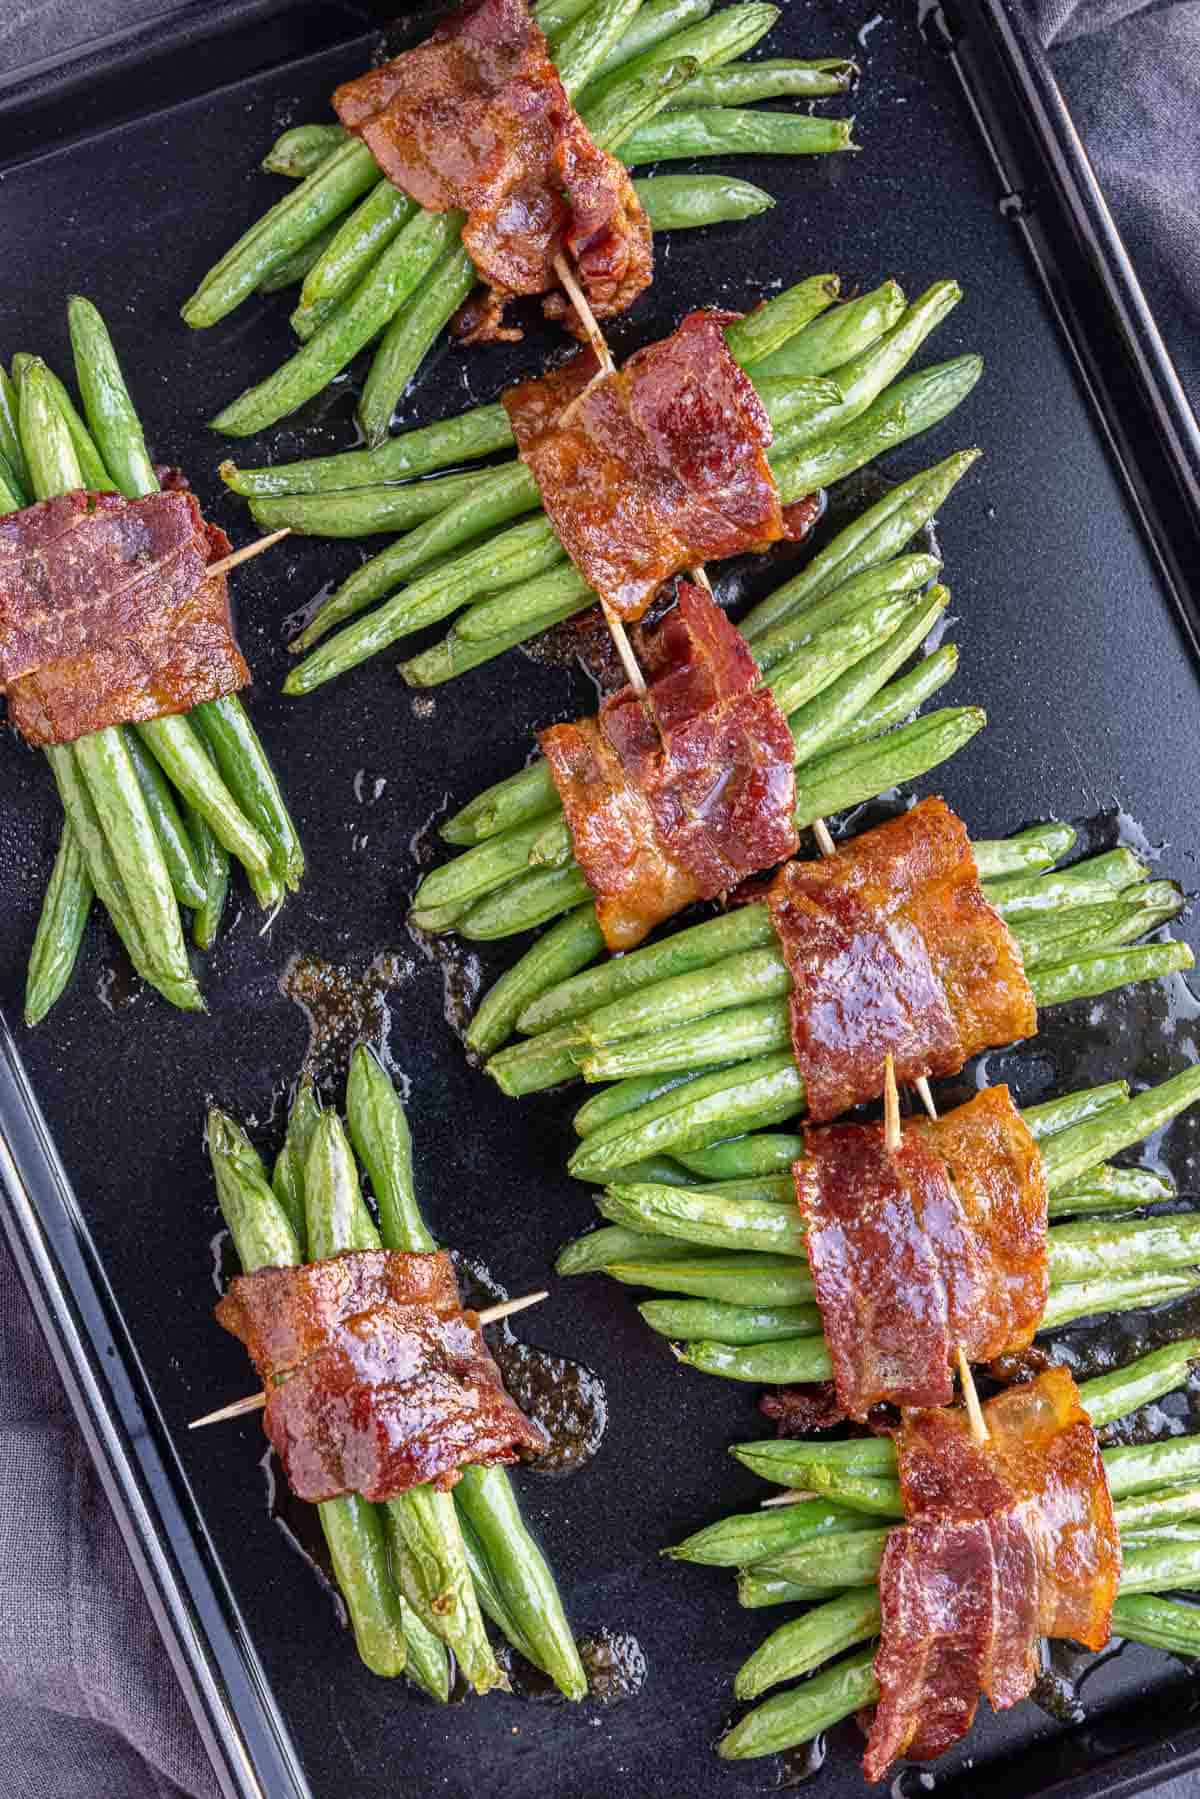 Bacon Wrapped Green Beans bundled together with toothpicks on a black sheetpan